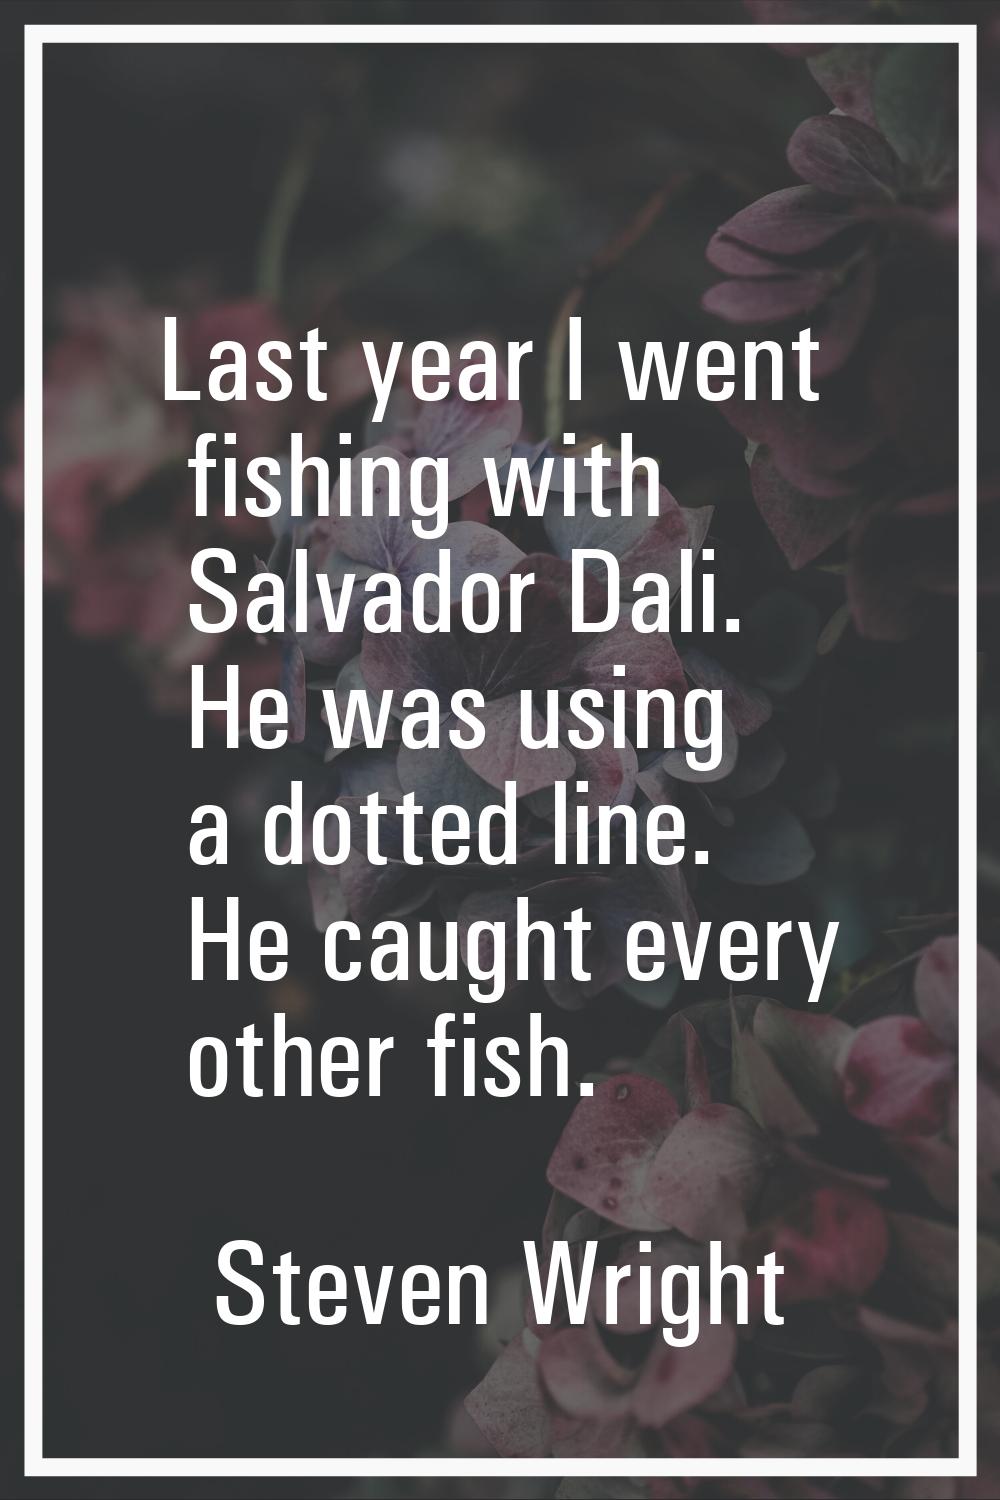 Last year I went fishing with Salvador Dali. He was using a dotted line. He caught every other fish